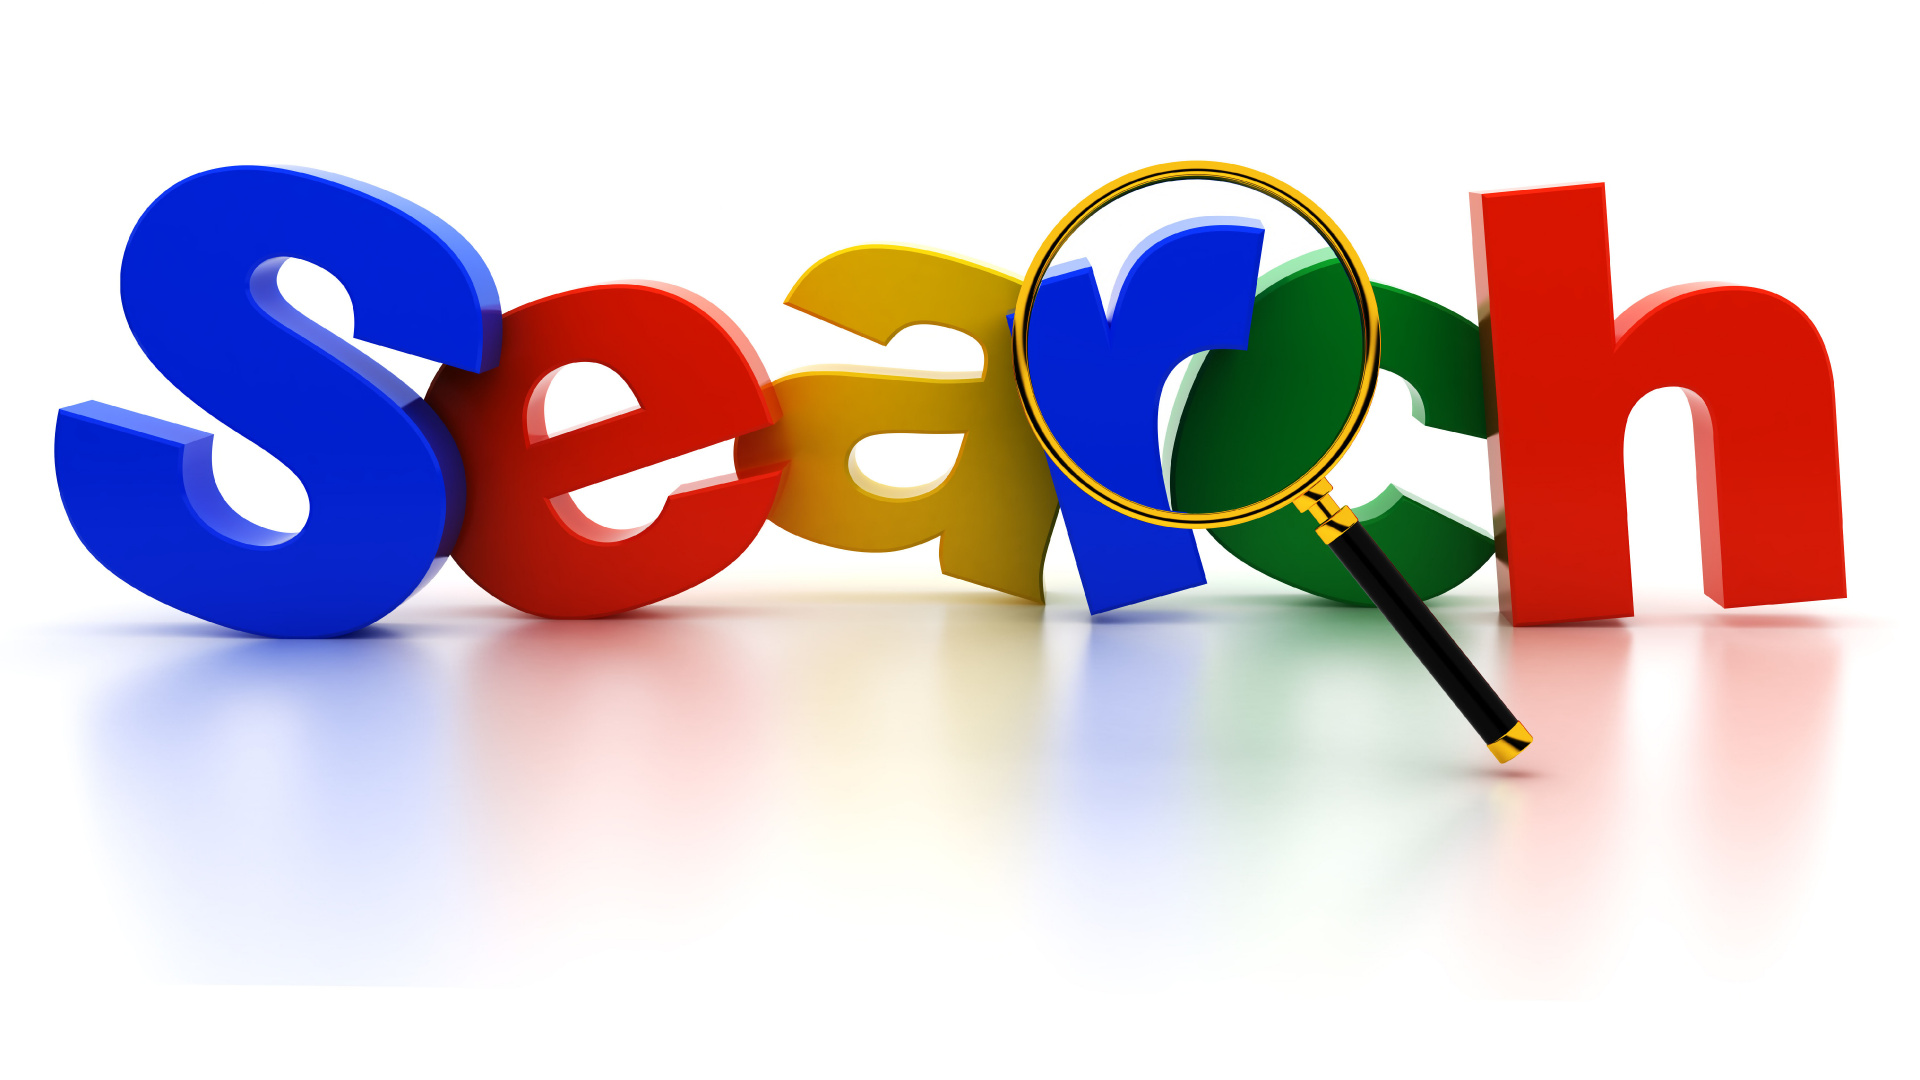 Search Engine Optimization, Web Search Engine, Google Search, Search Engine, Text. Wallpaper in 1920x1080 Resolution